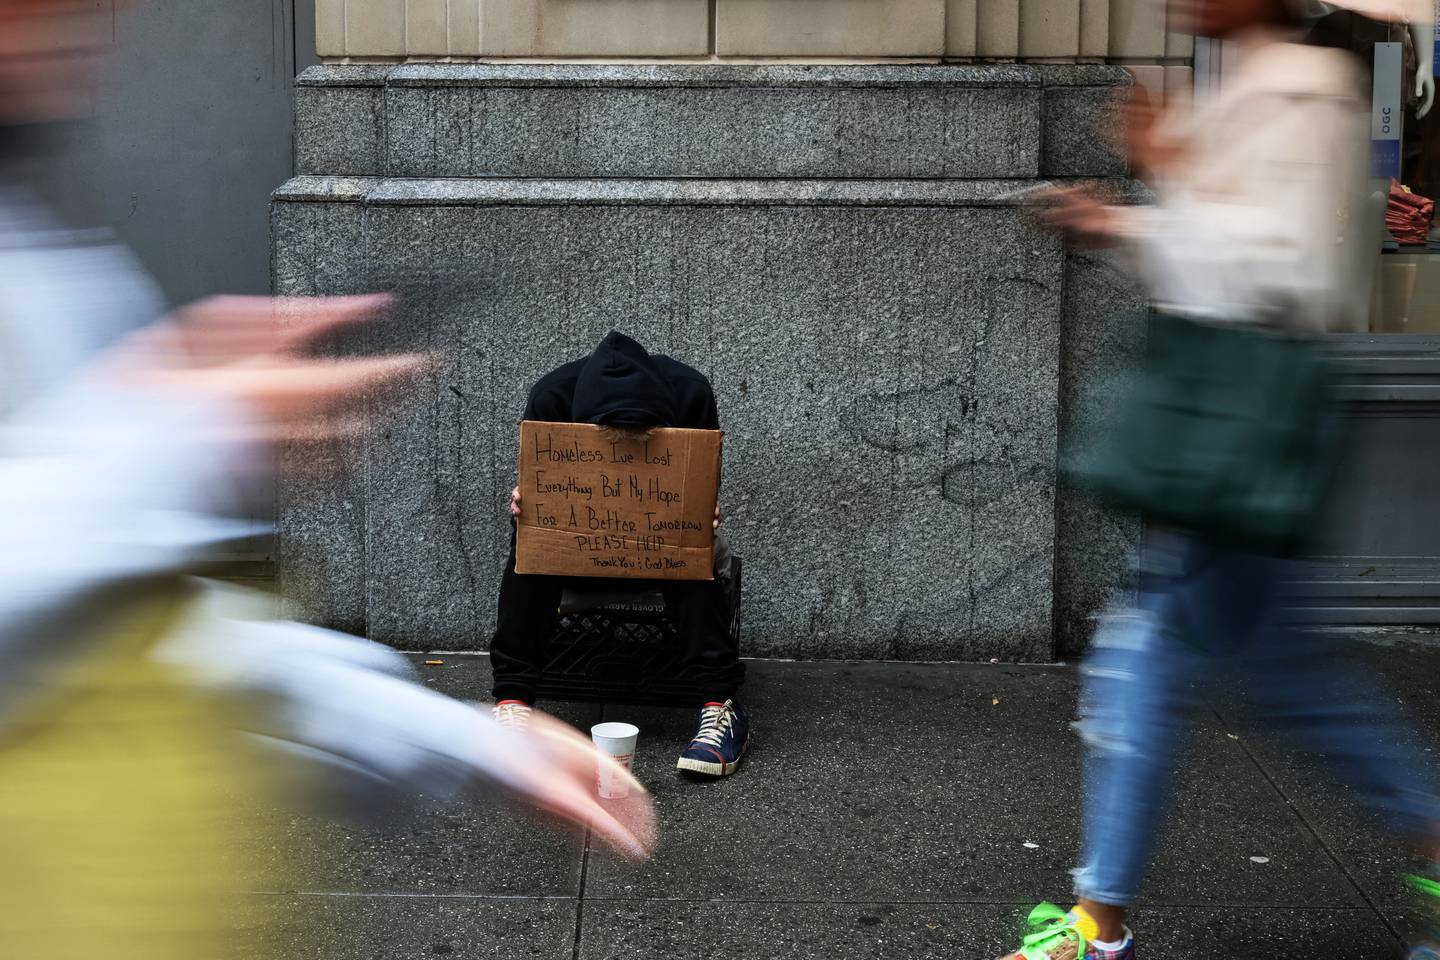 A homeless person on a sidewalk in New York City. Reuters